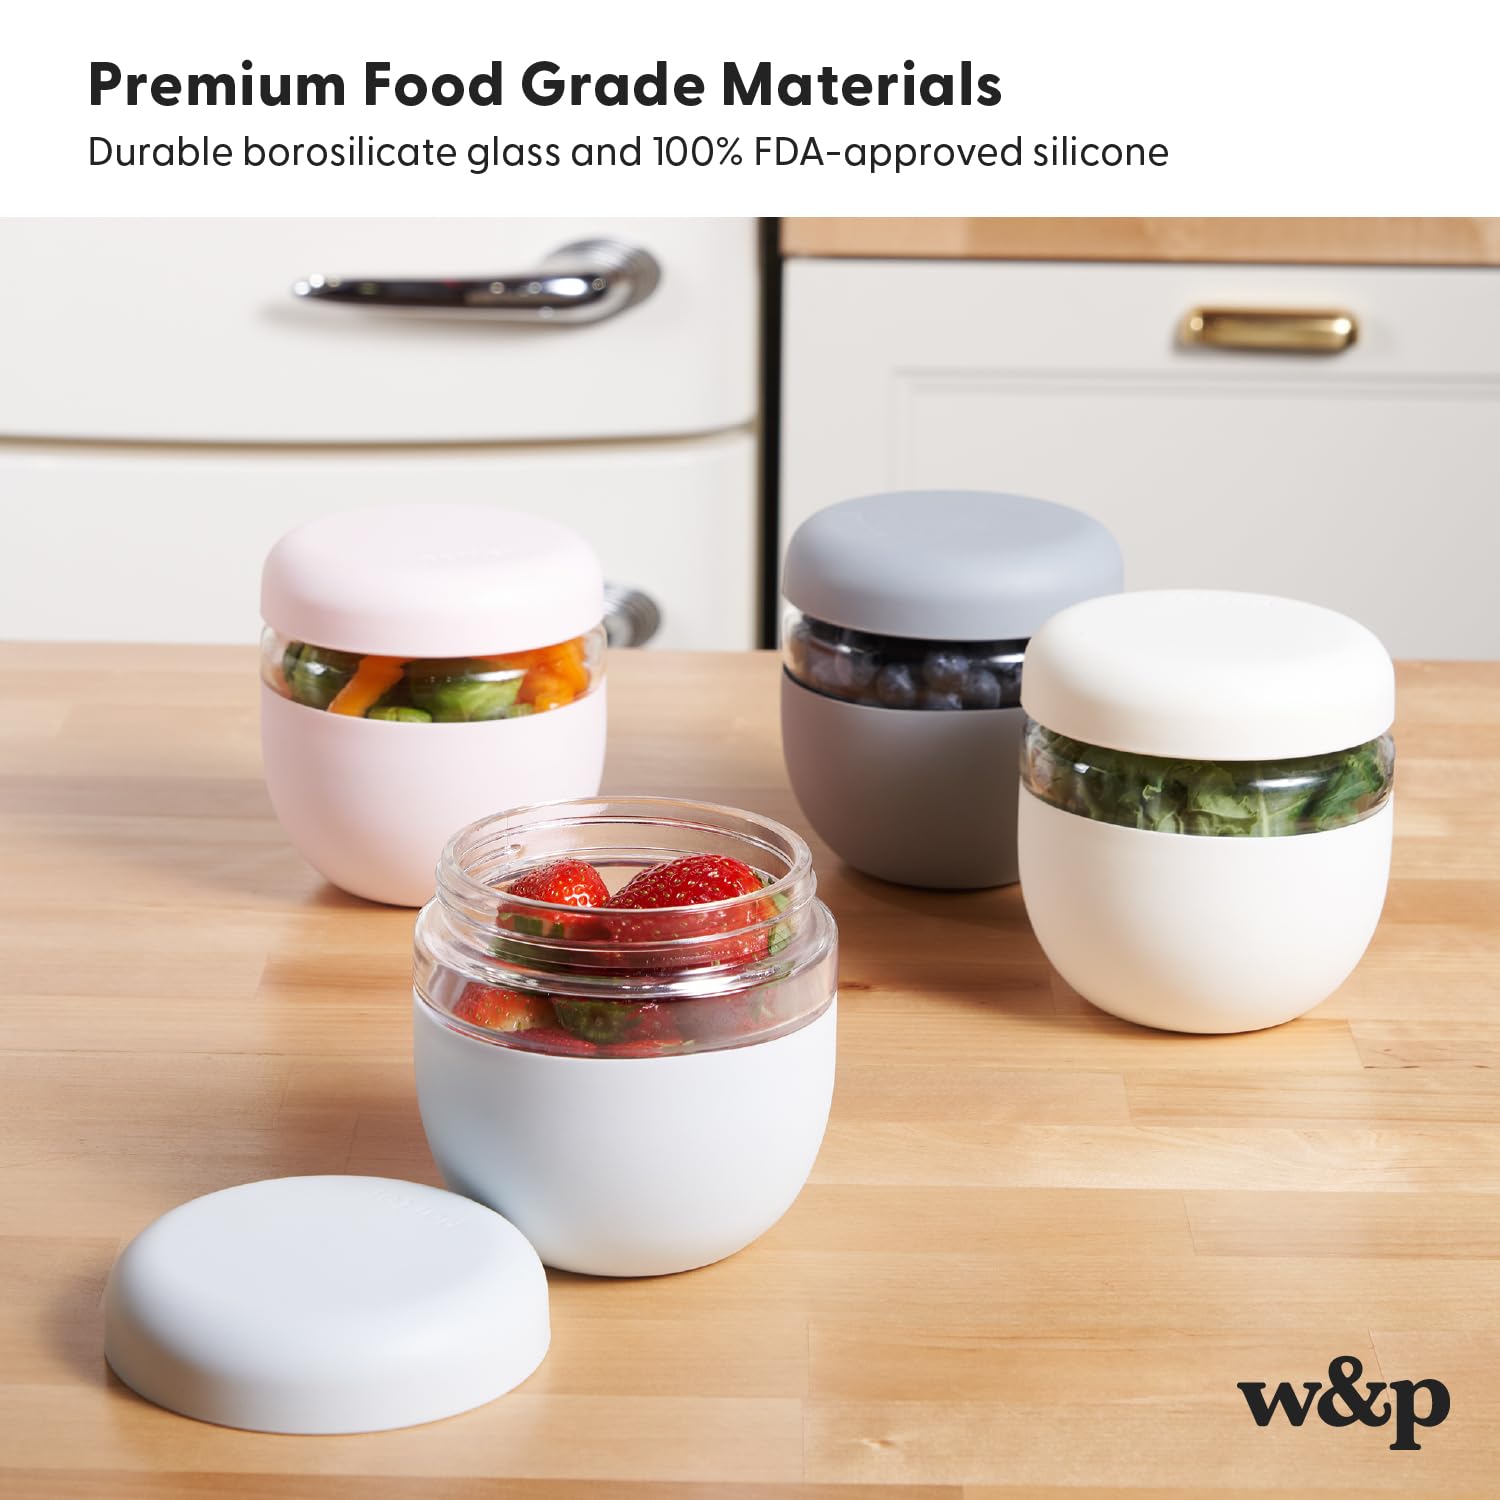 W&P Porter Seal Tight Glass Food Storage Container with Lid, Terrazzo Cream 24oz, Leak & Spill Proof Meal Prep Container, Microwave & Dishwasher Safe, Borosilicate Glass